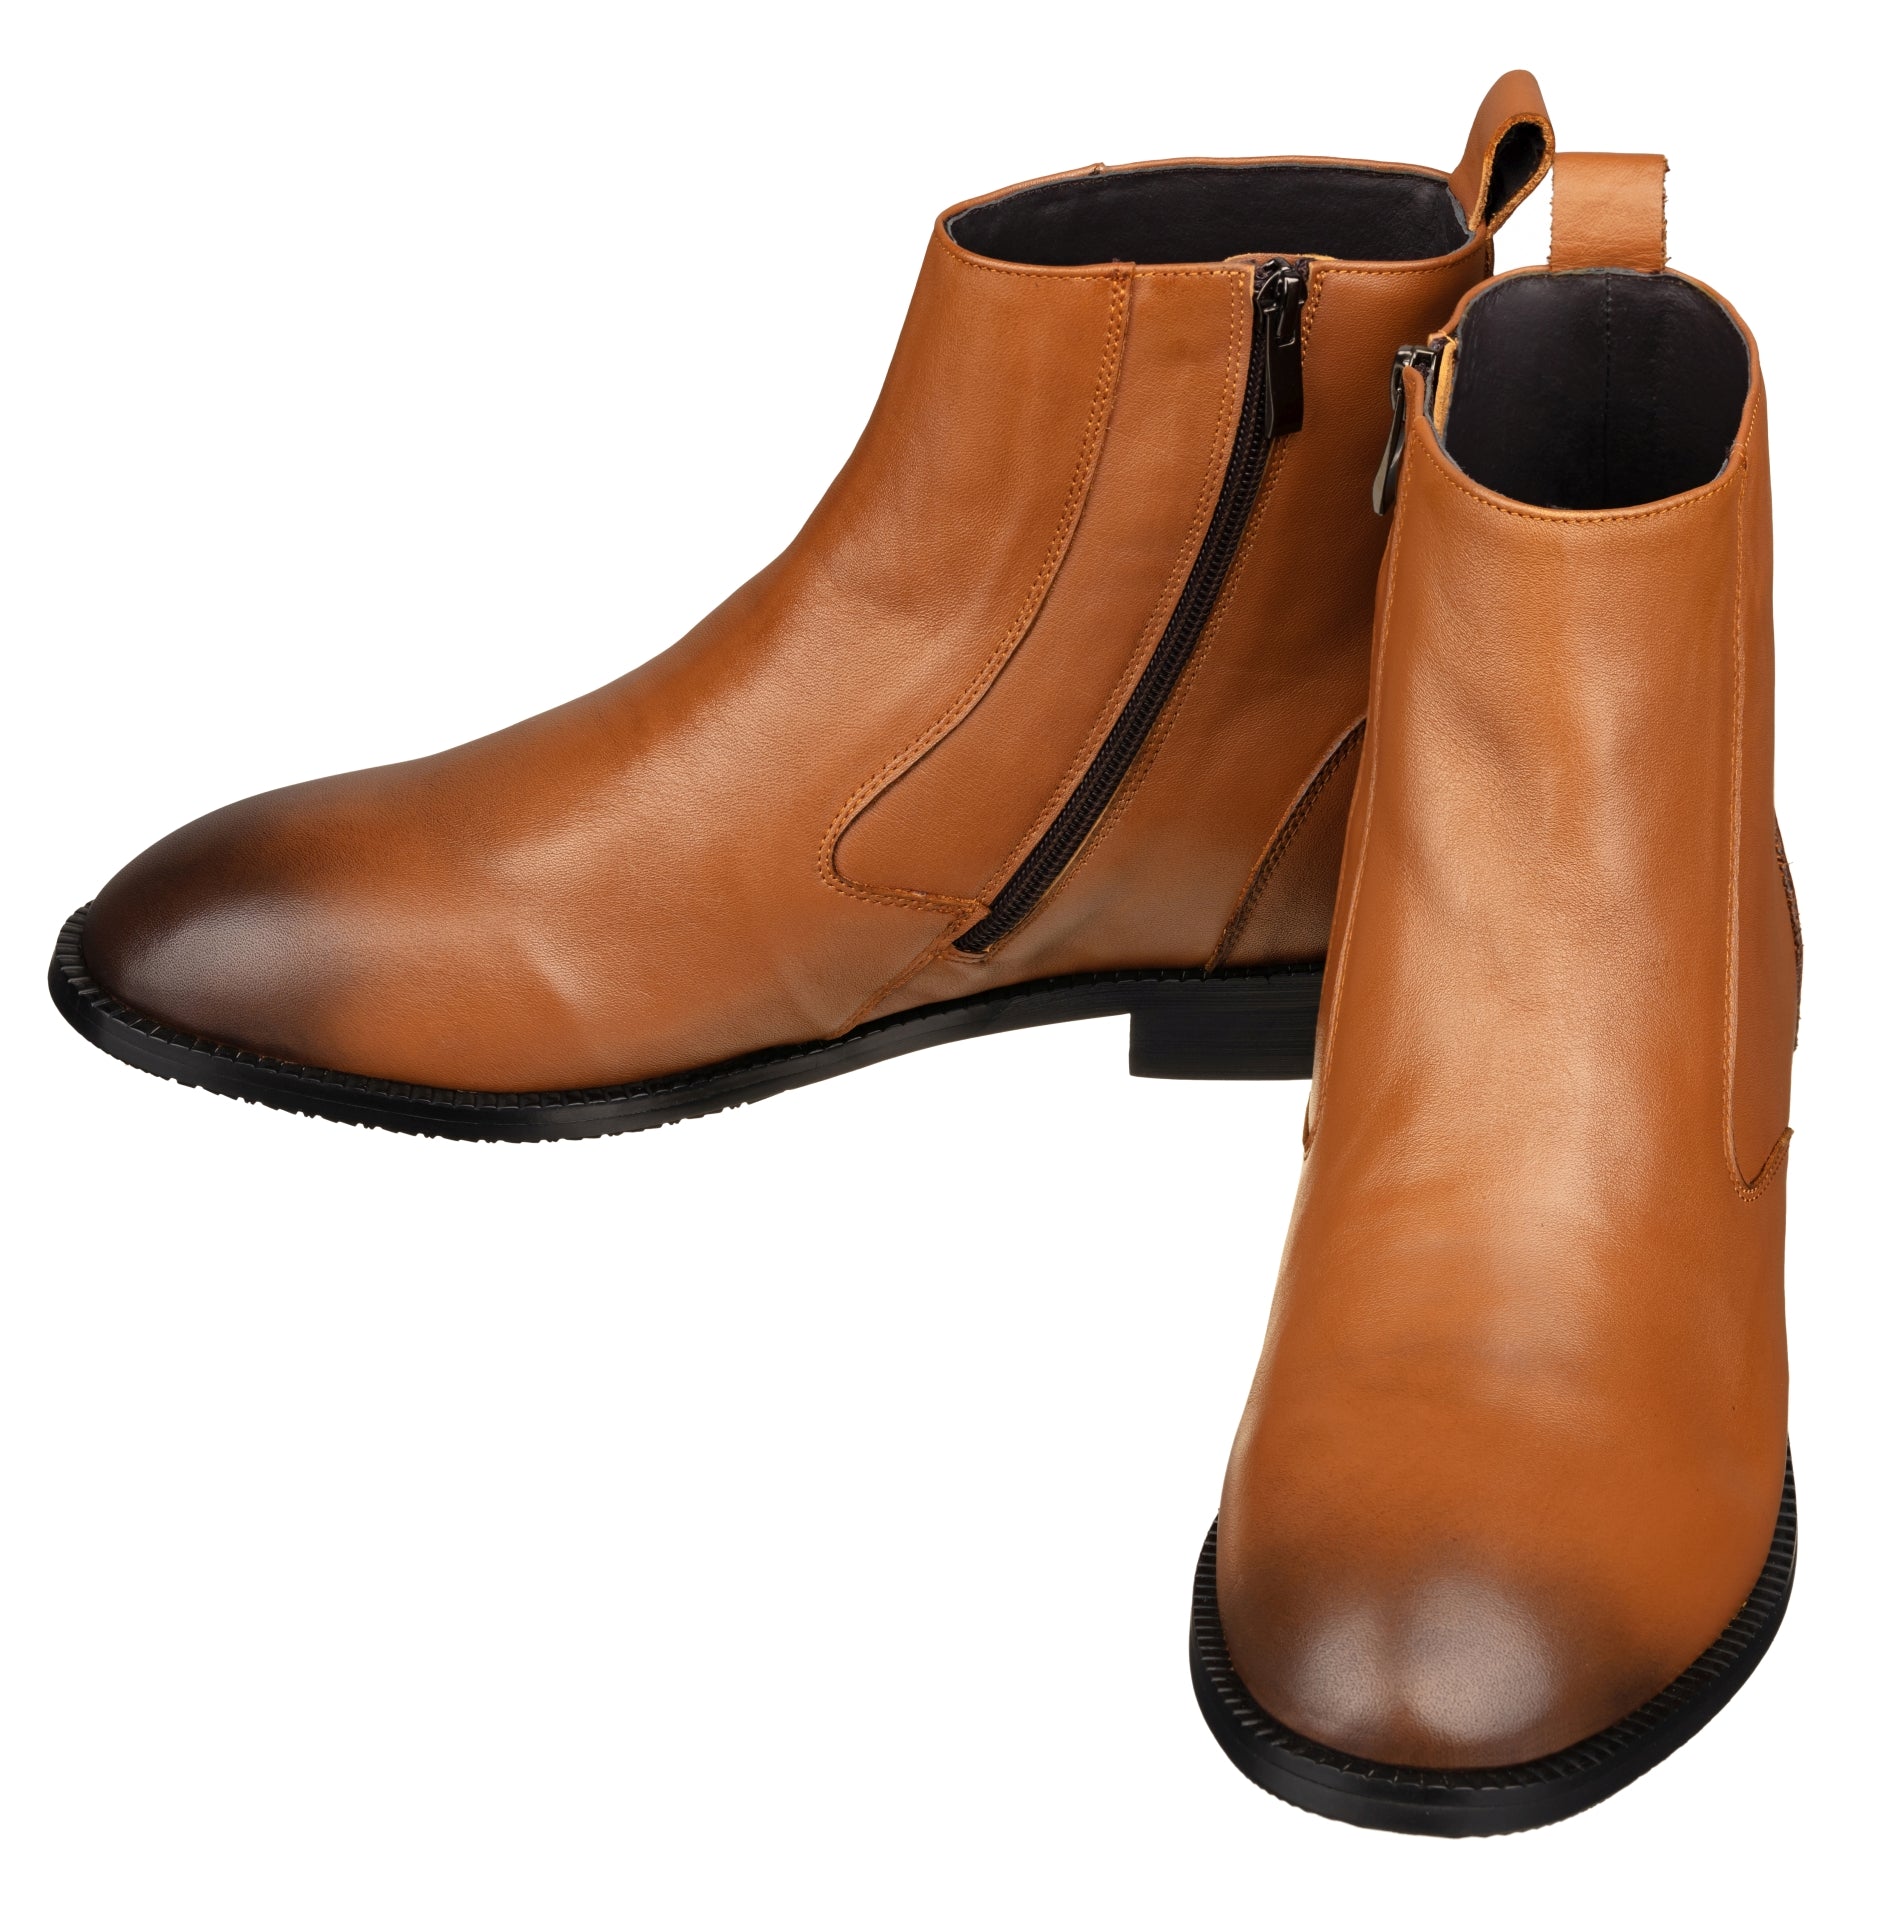 Elevator shoes height increase TOTO - K33094 - 2.6 Inches Taller (Light Brown) - Zipper Boot